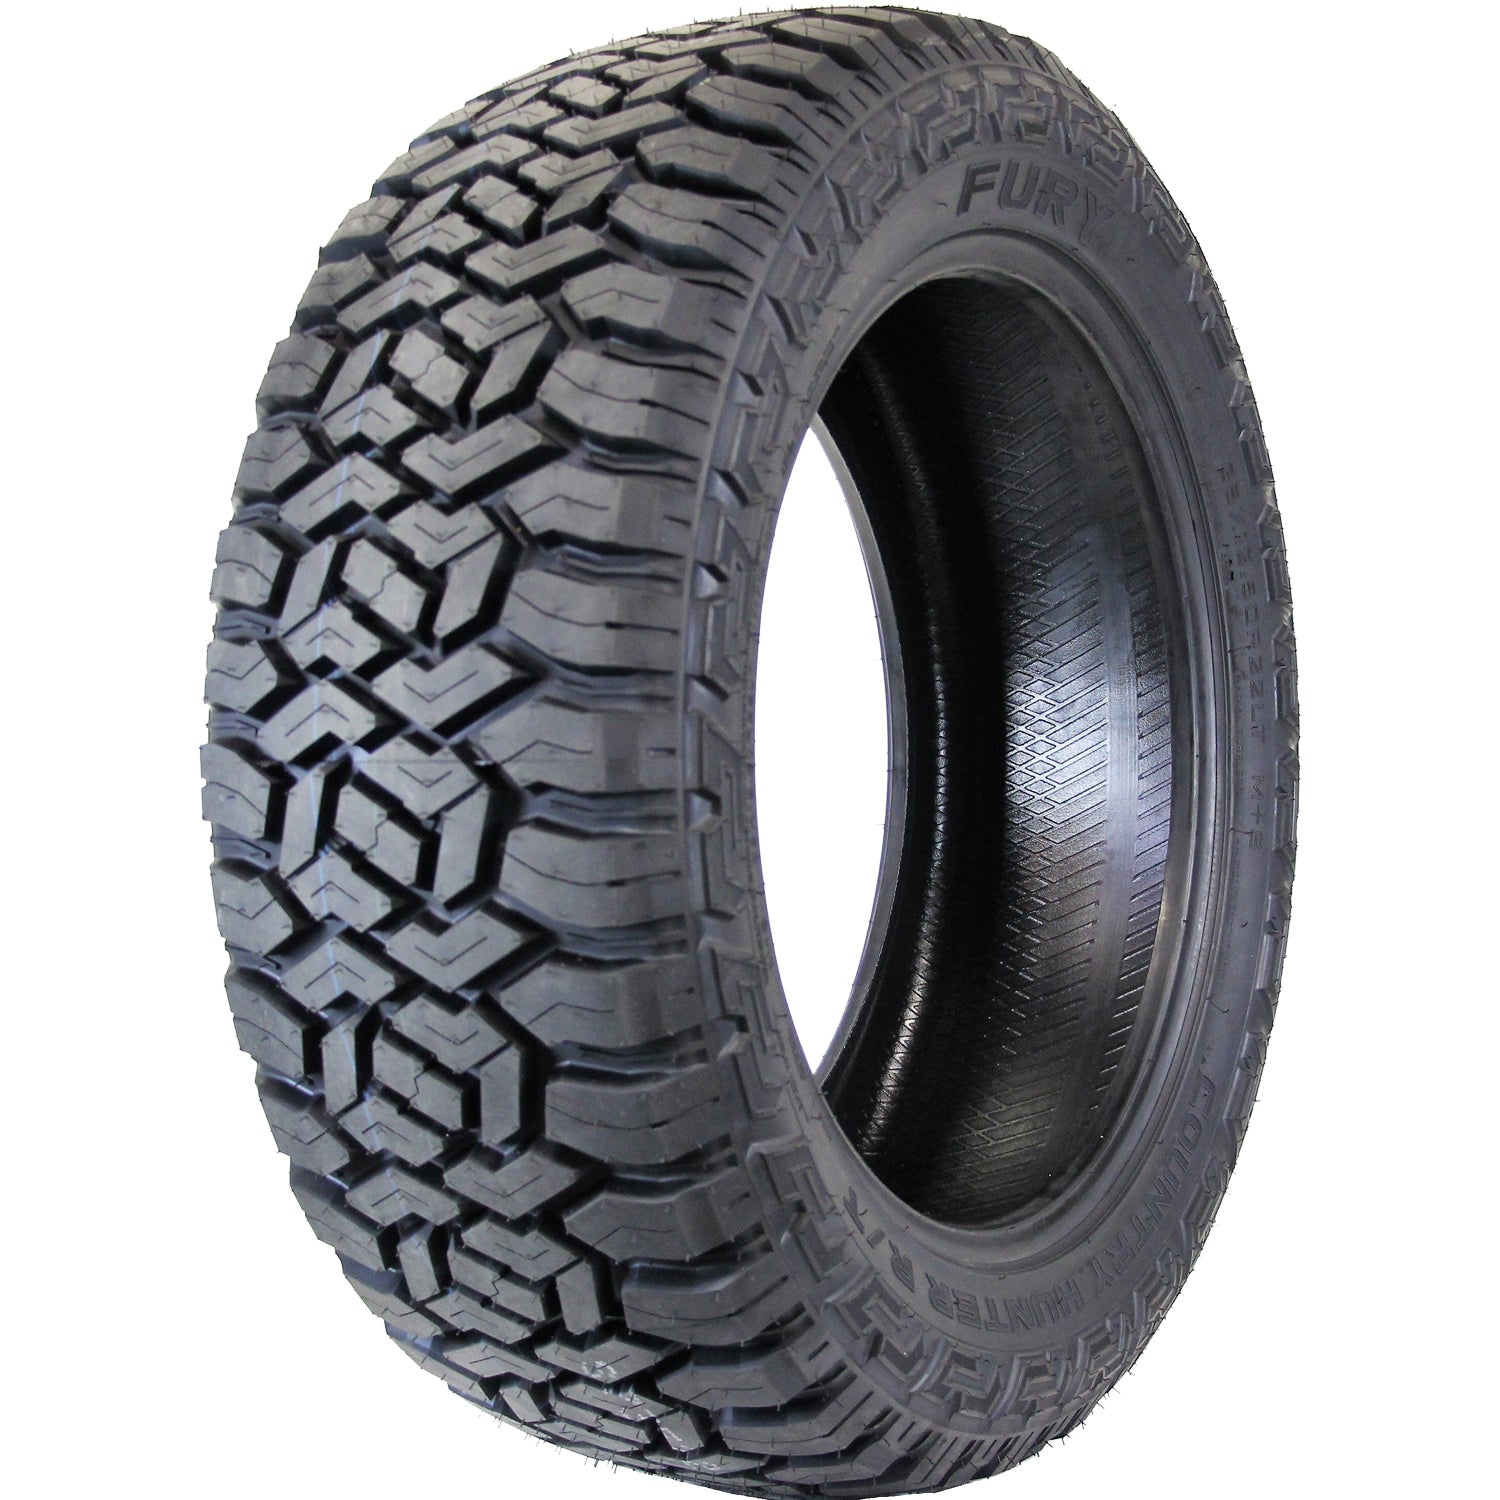 FURY OFFROAD COUNTRY HUNTER RT LT285/55R20 (32.6X11.7R 20) Tires